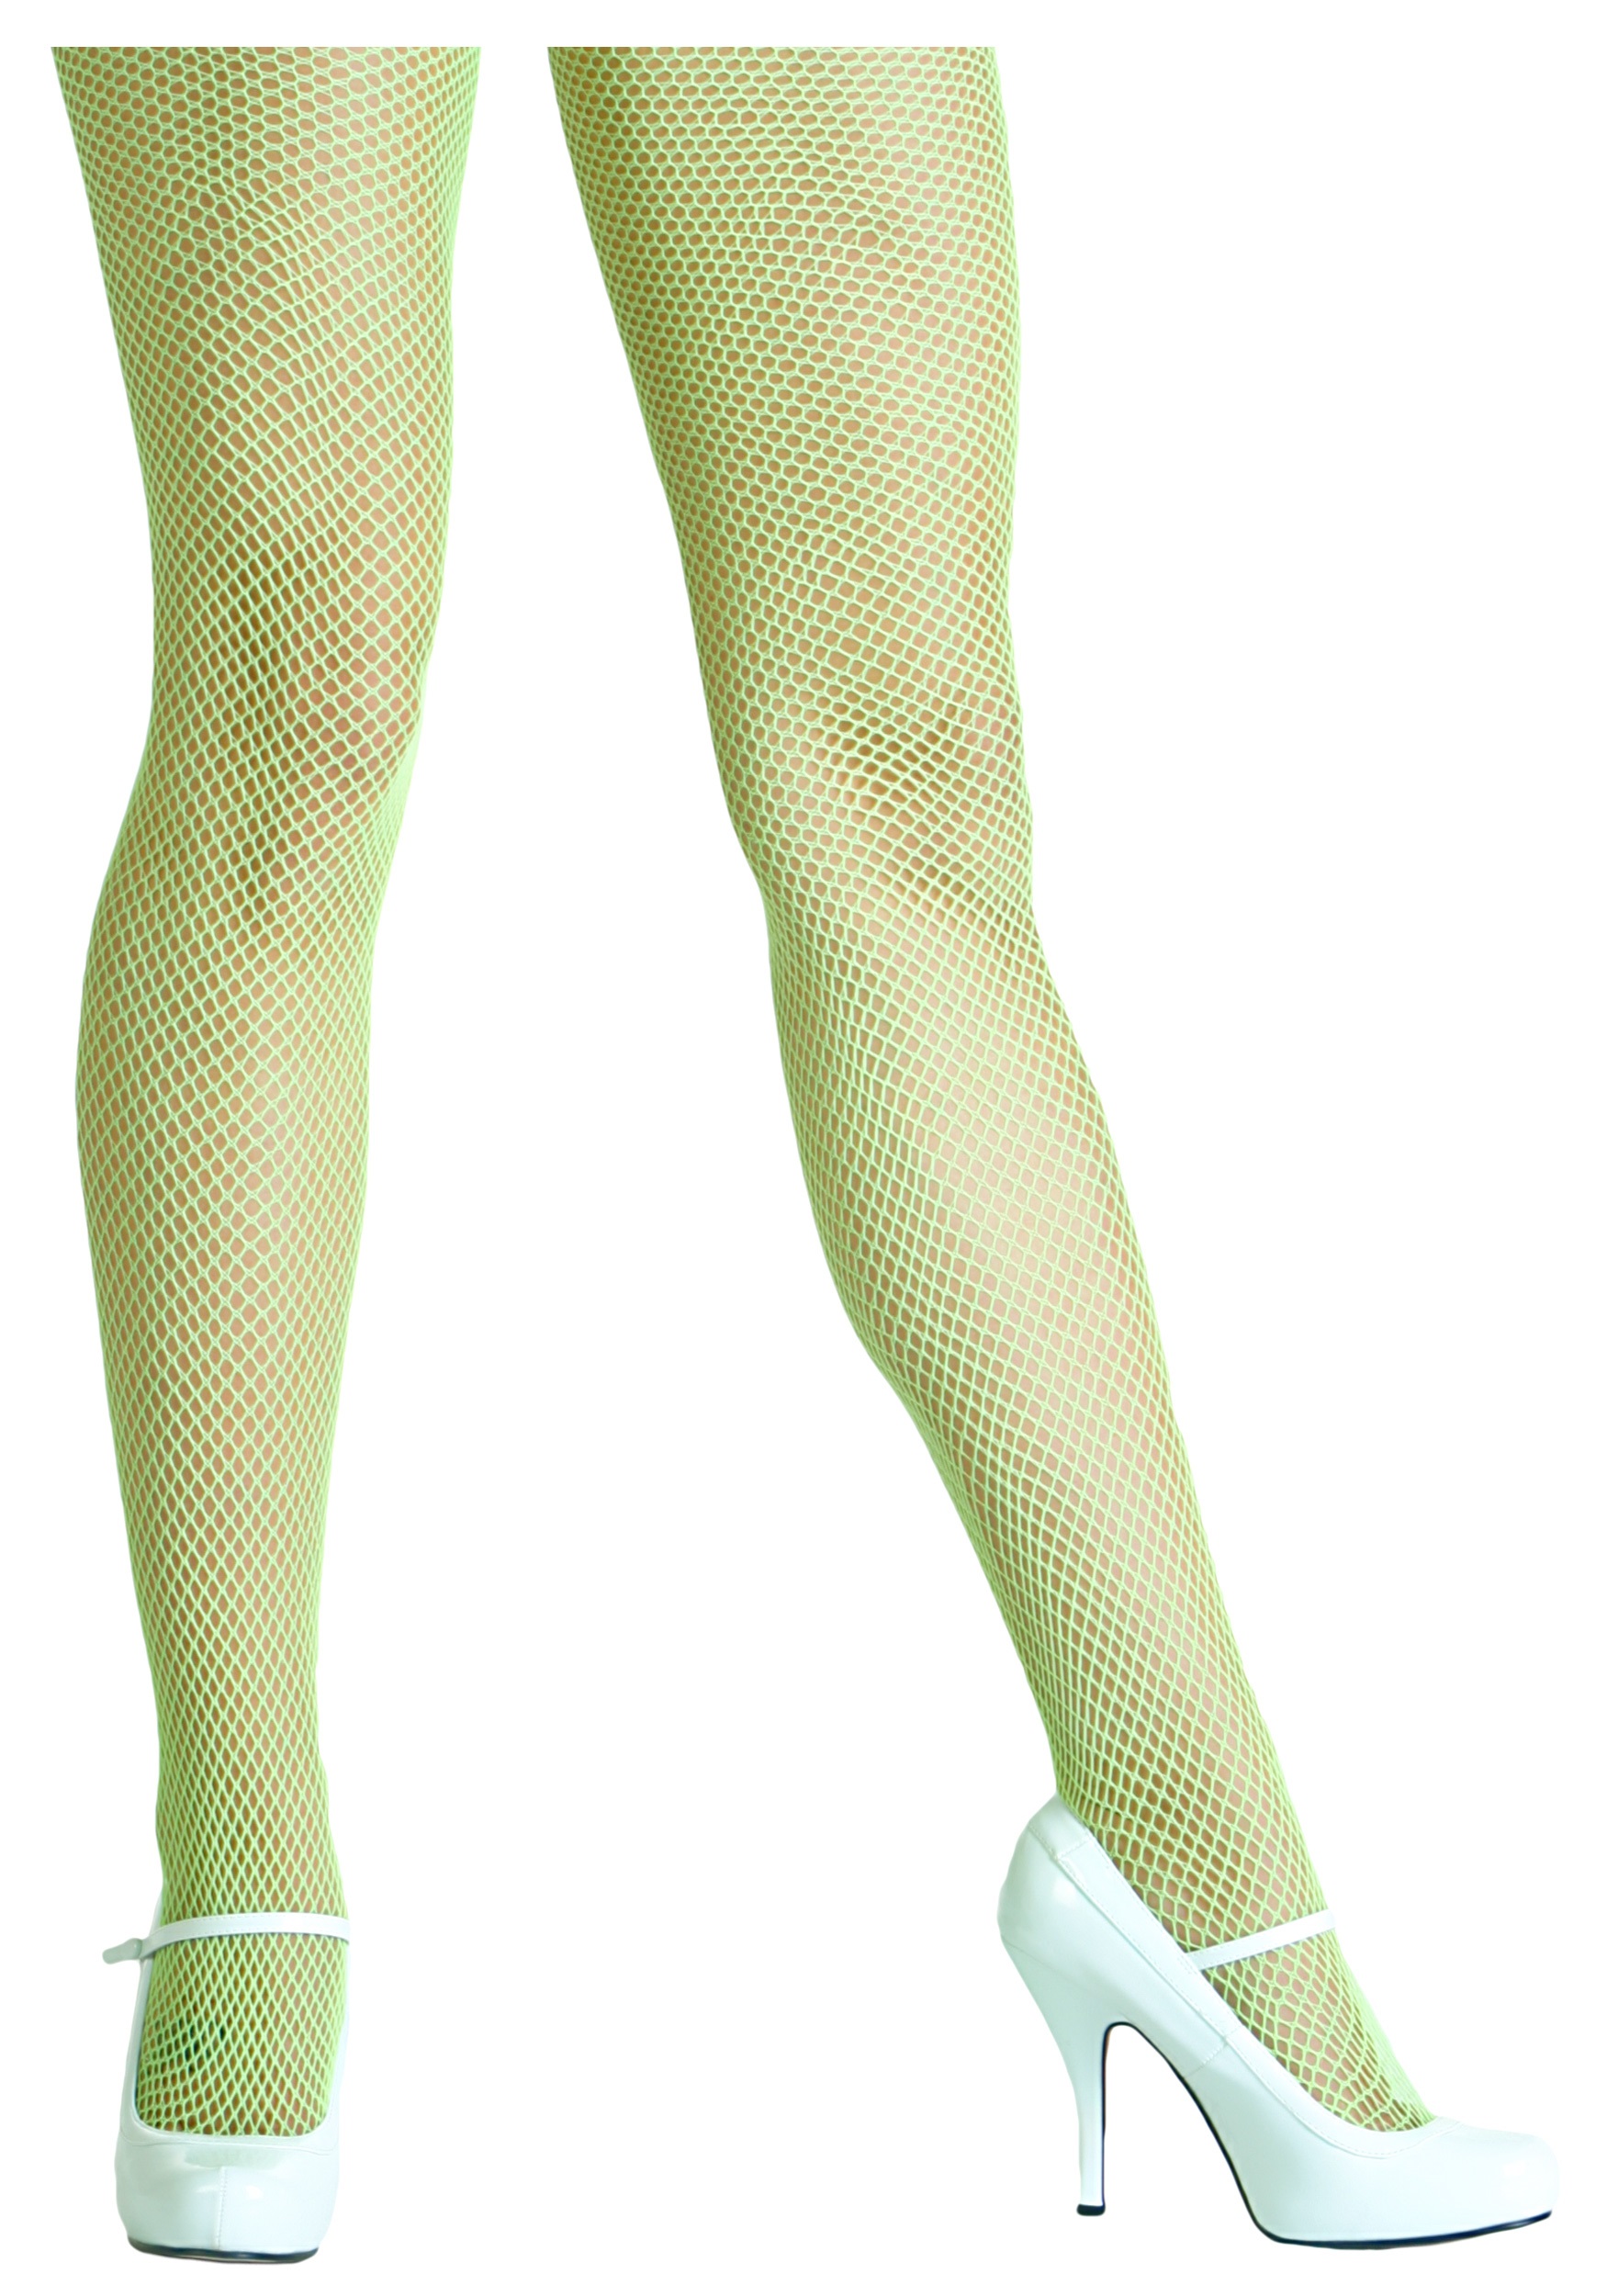 GIORGIA Fishnet Thigh Highs - Stockings That Stay Up